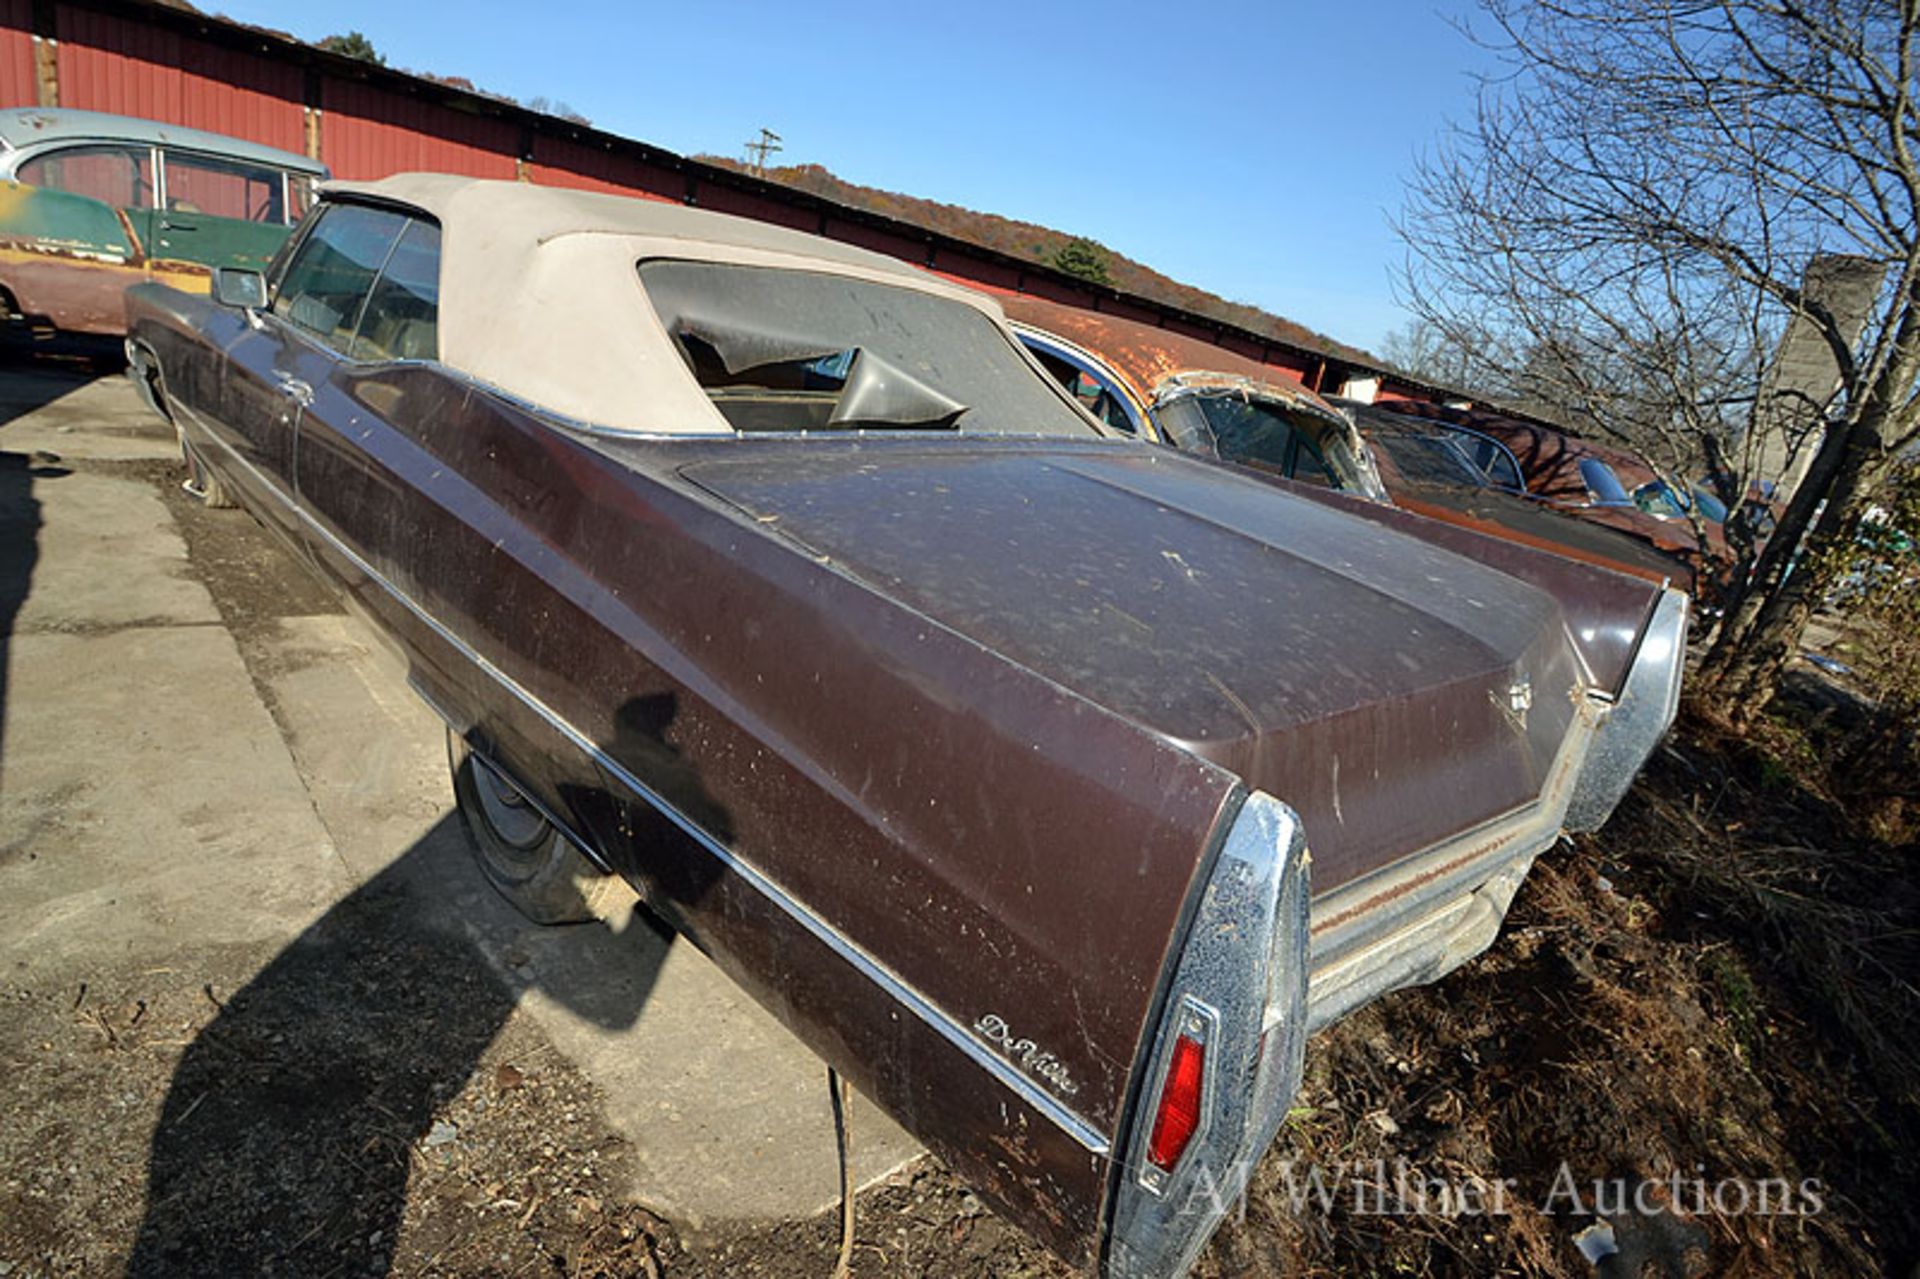 1968 Cadillac Coupe Deville, Convertible - Image 2 of 3